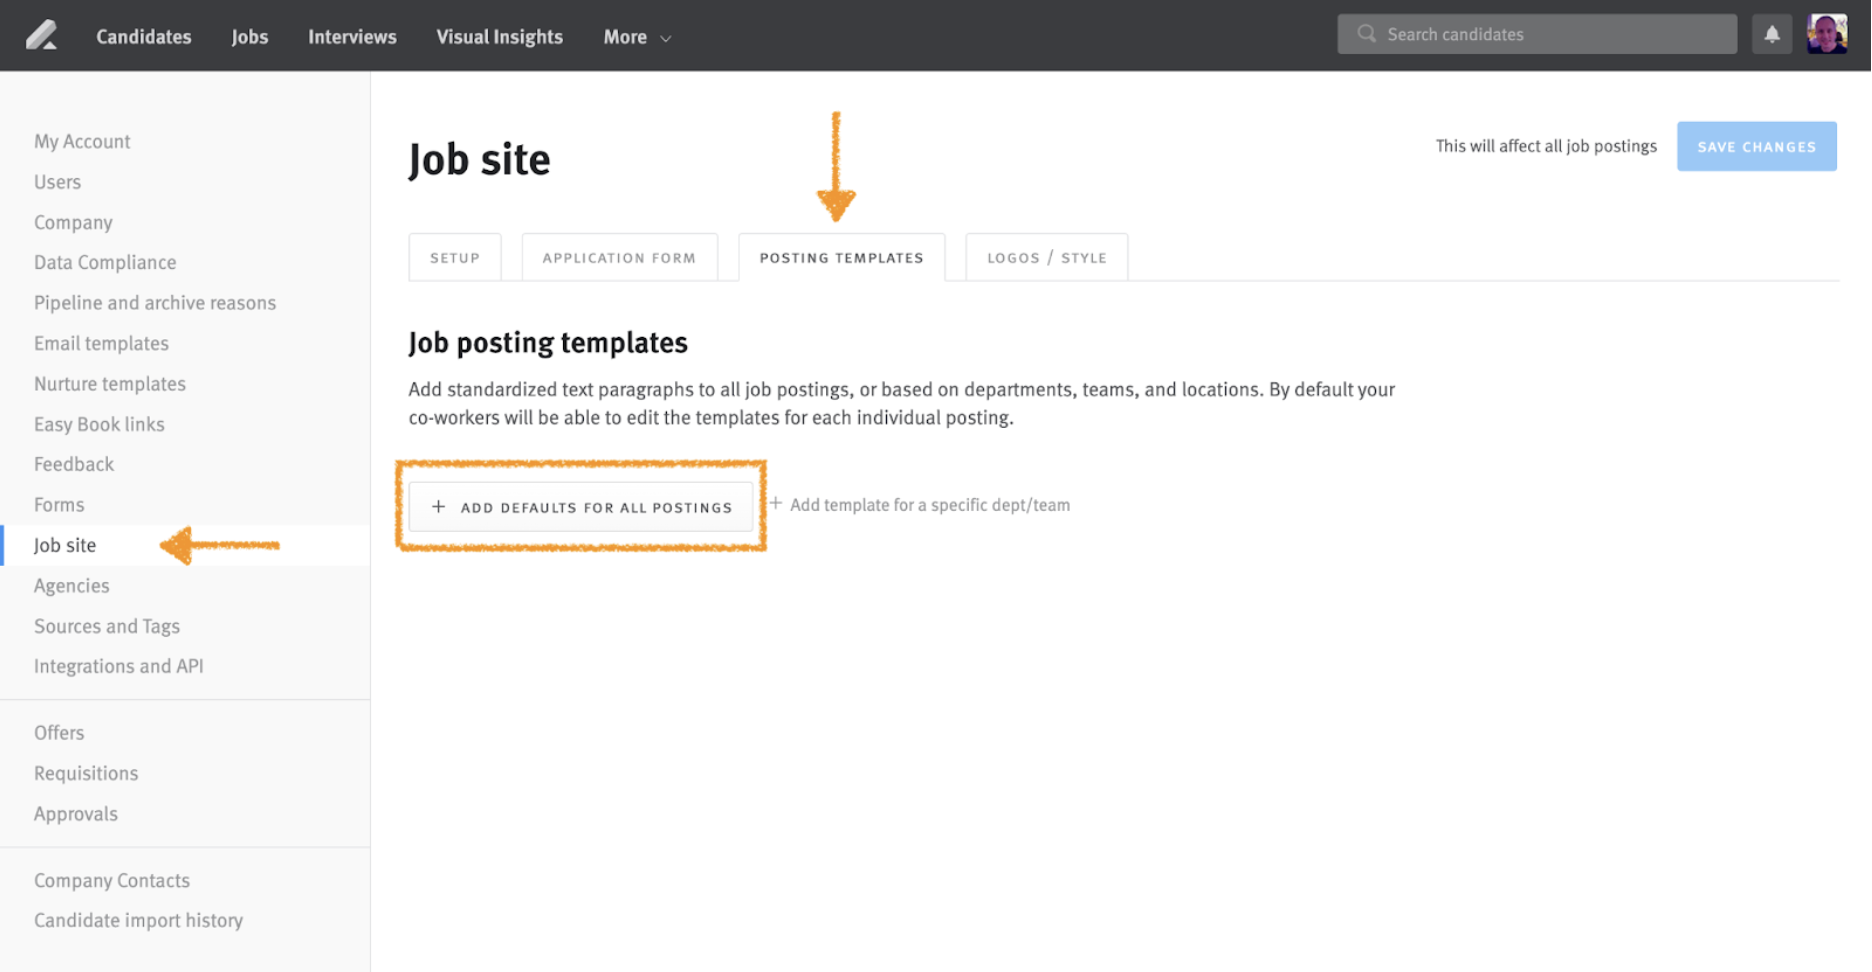 Job site posting template page in Lever settings; arrow points to Job site in navigation menu and posting templates tab at the top of the settings page; the 'Add default for all postings' button is outlined